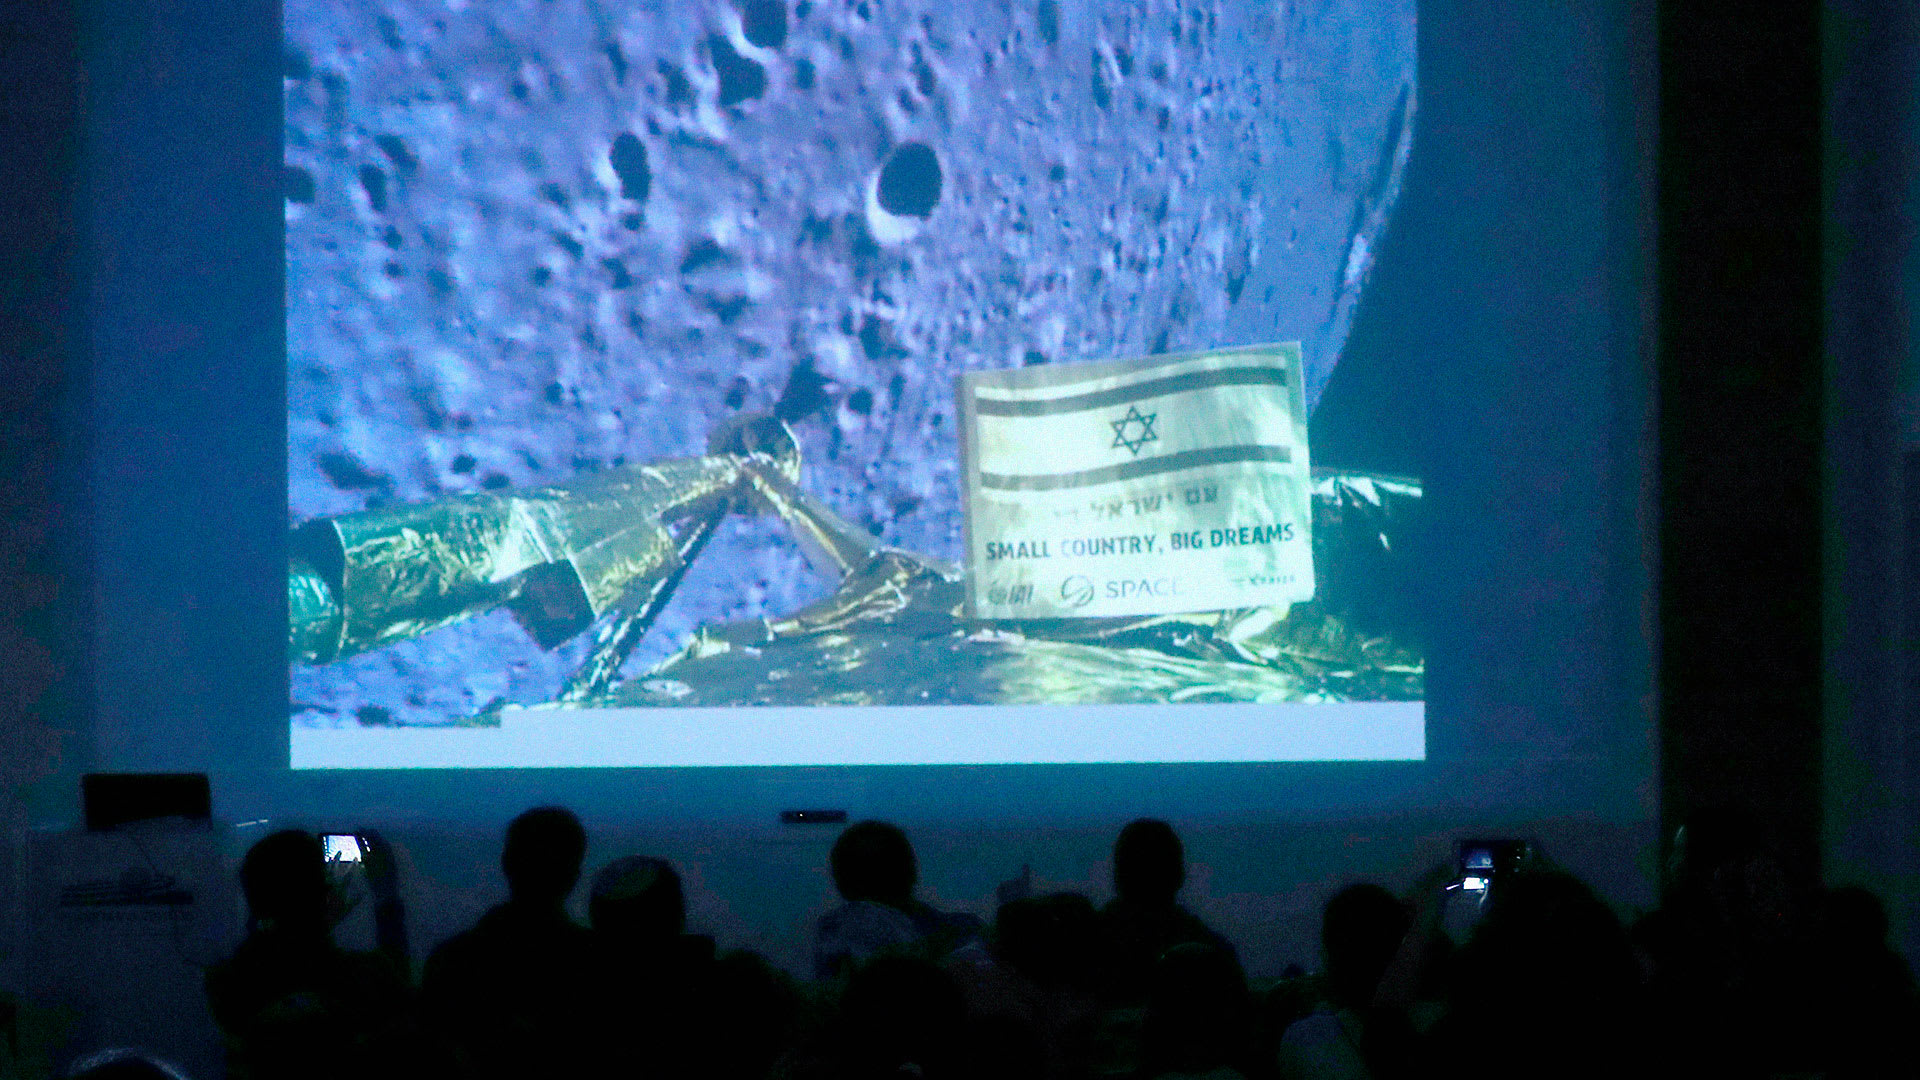 Israel’s moon lander crashed, but don’t call it a failure